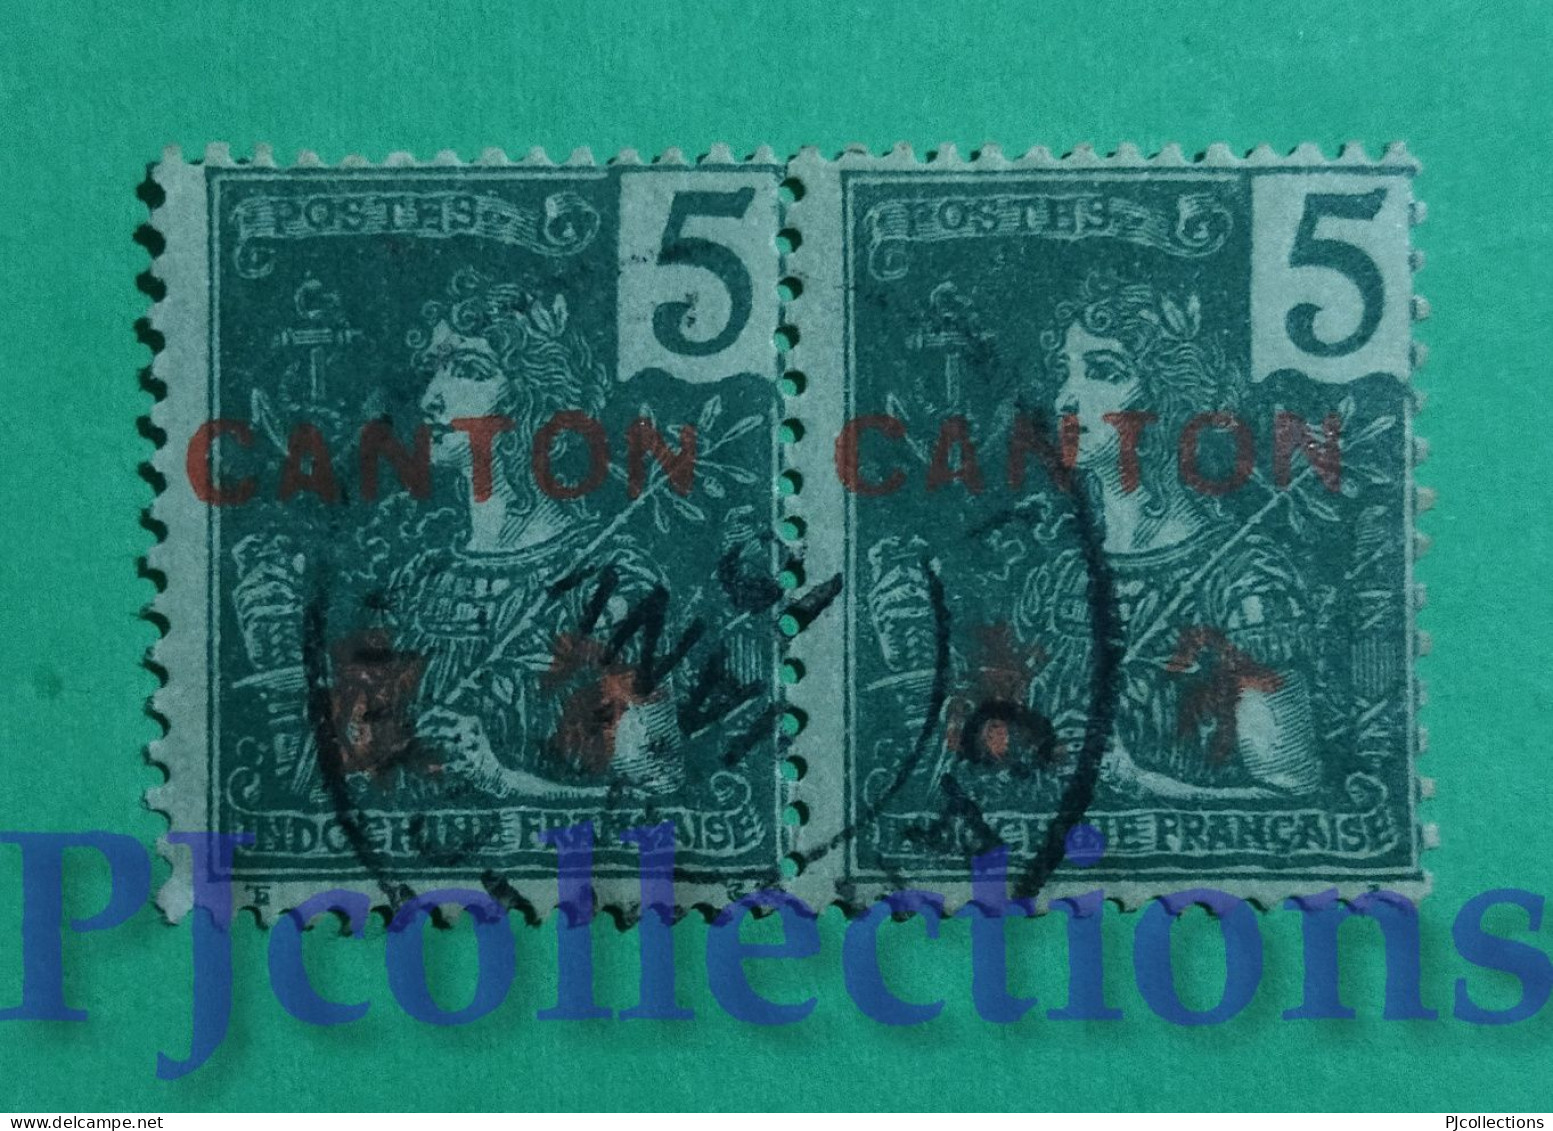 S786- FRENCH INDOCHINA CANTON 1907 OVERPRINTED 5c IN COPPIA - COUPLE USATI - USED - Gebruikt